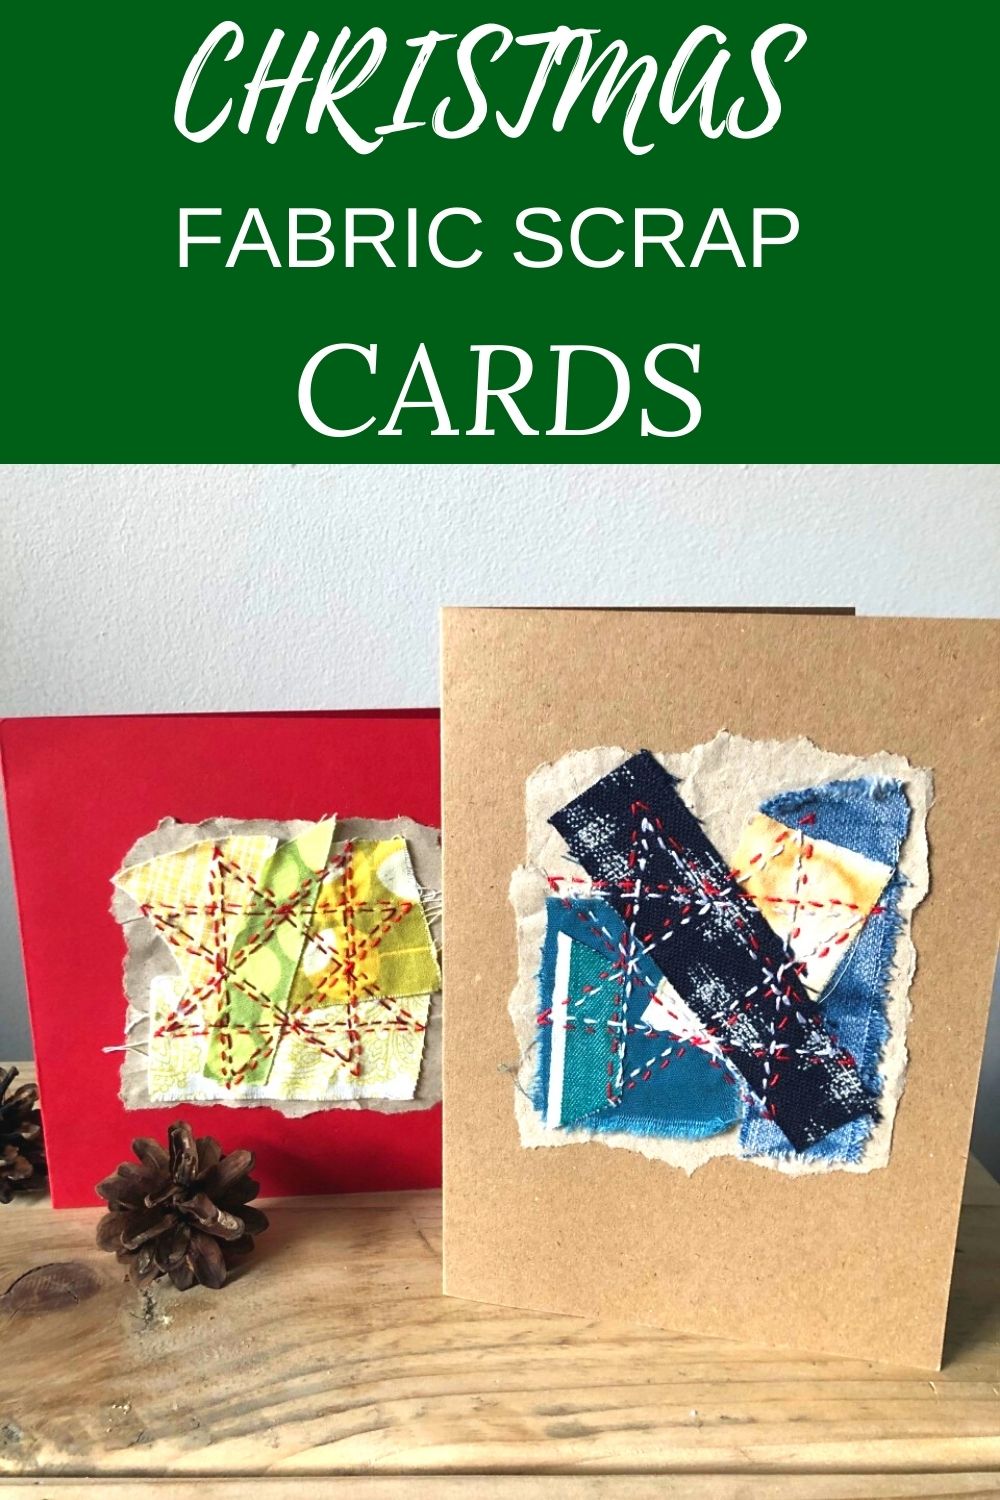 Combine textile collage with some hand stitching to create unique individual cards. The process of making fabric scraps cards is relaxing and creative.